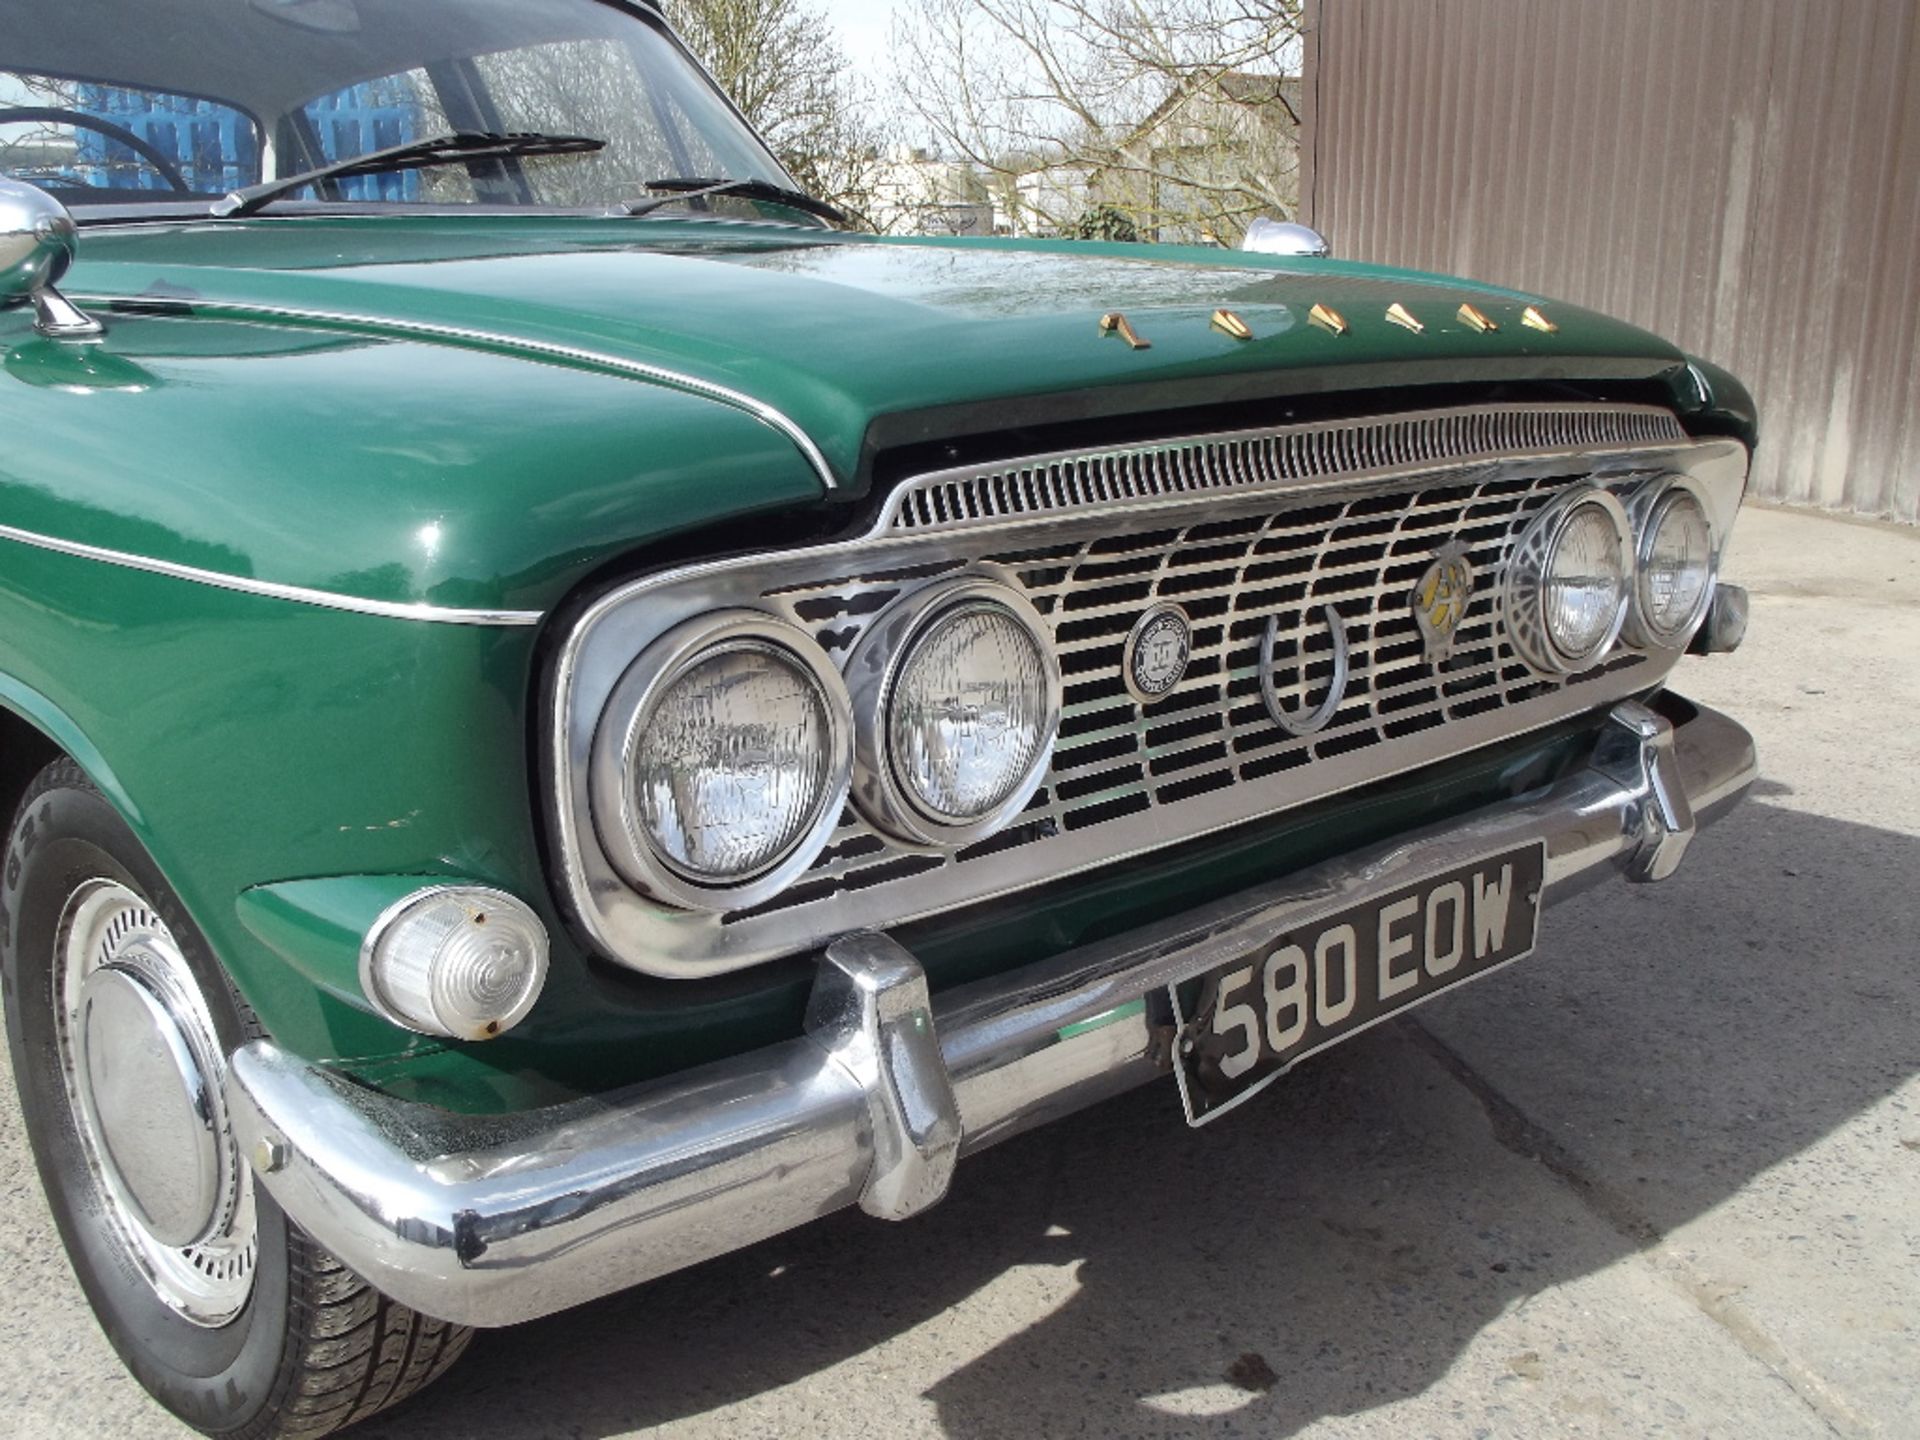 A 1963 Ford Zodiac Mk III, registration number 580 EOW, chassis number Z64C-186080, green. The Mk - Image 6 of 6